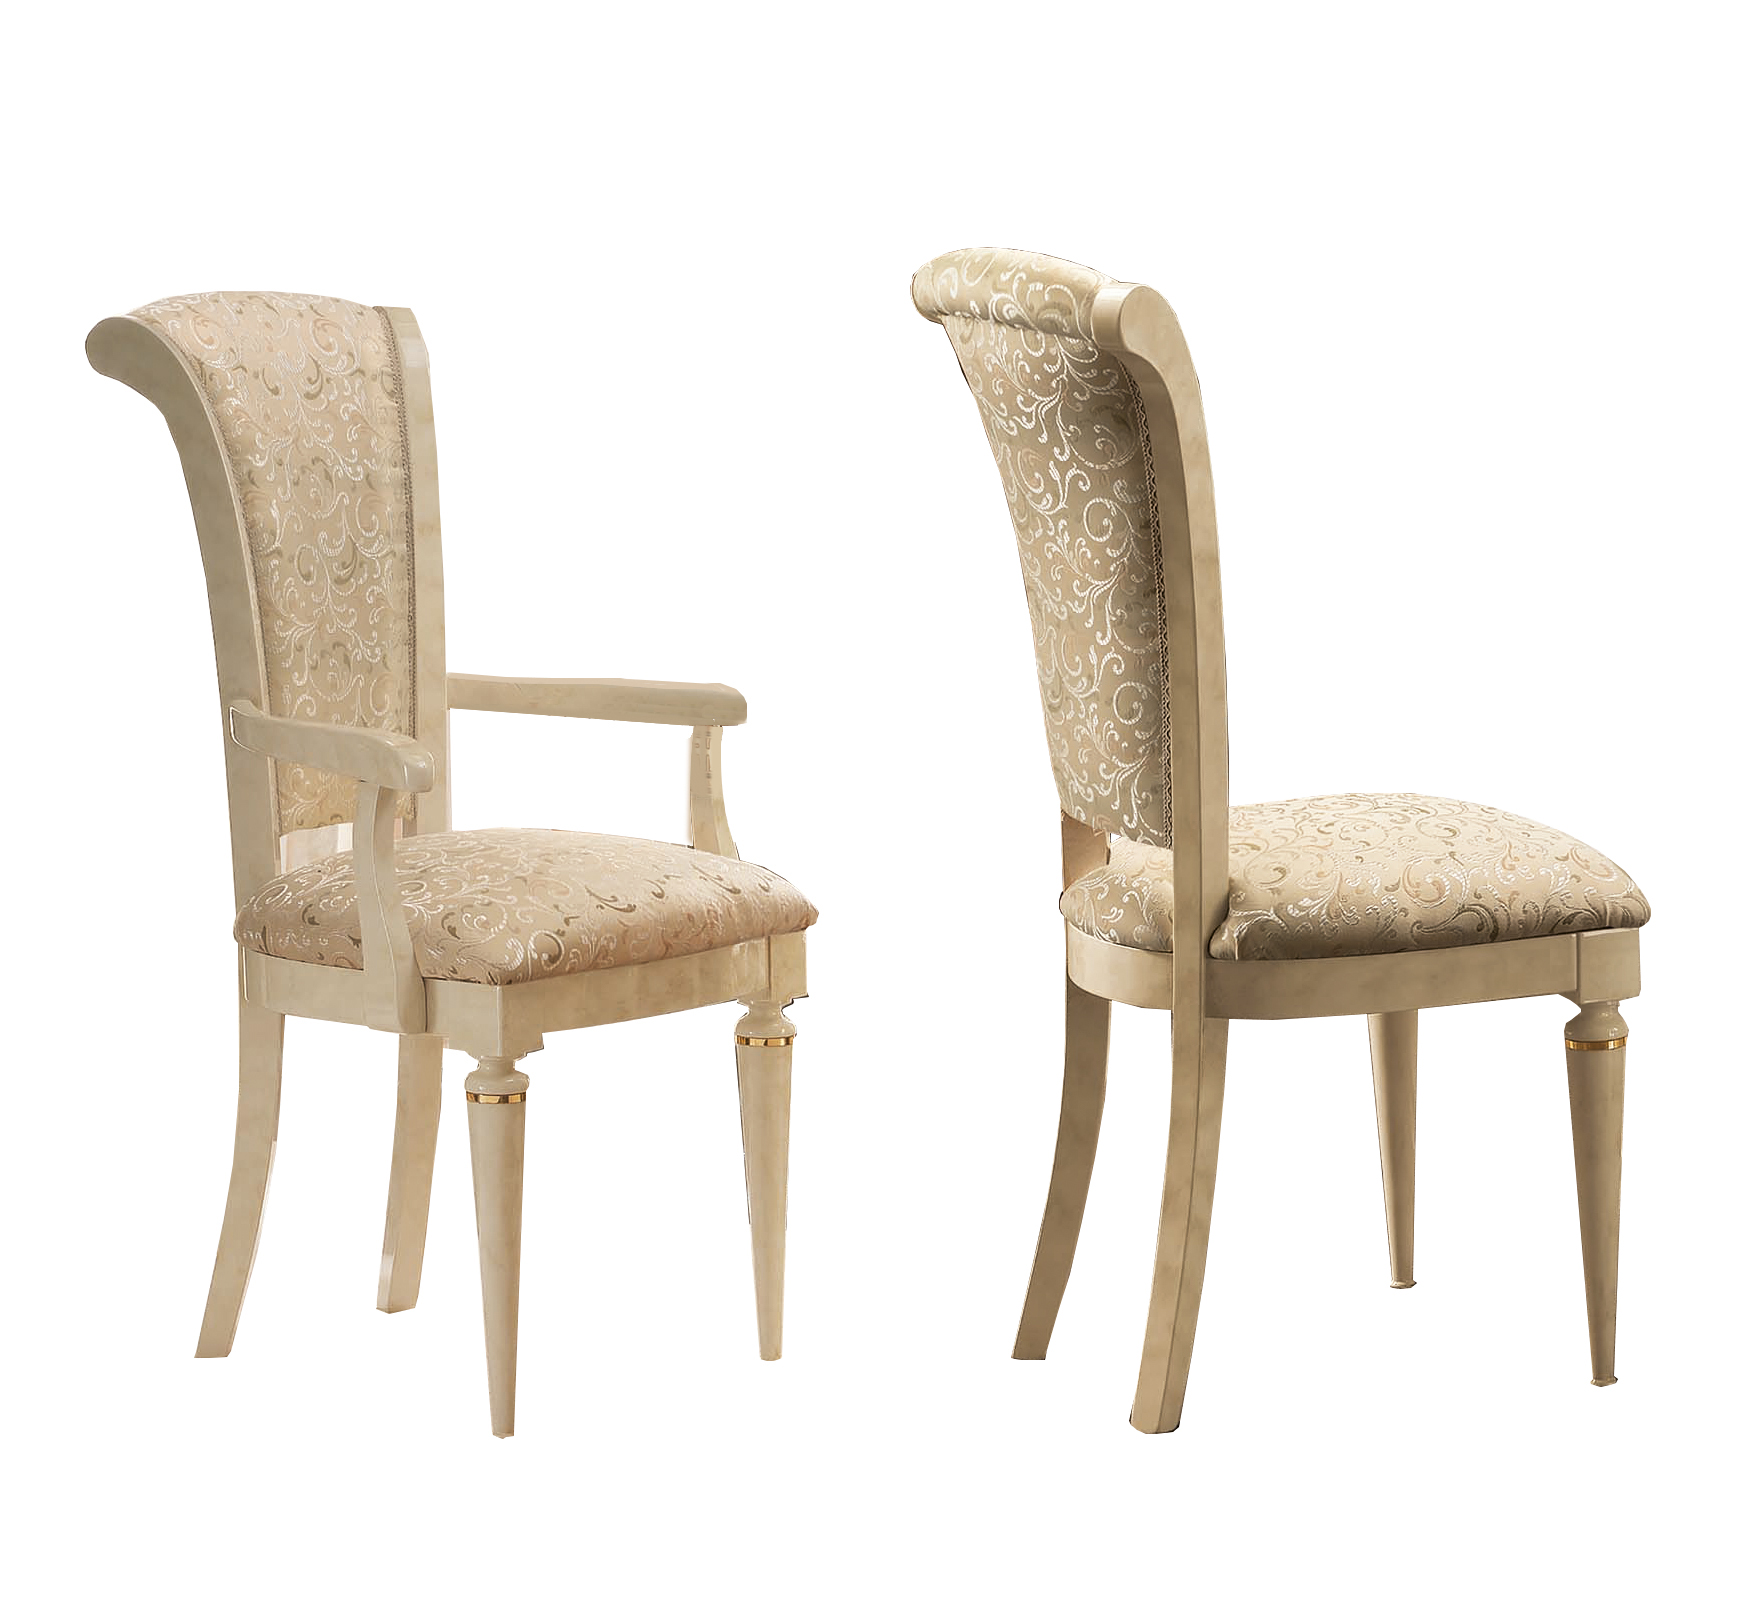 Dining Room Furniture Tables Fantasia Chair by Arredoclassic